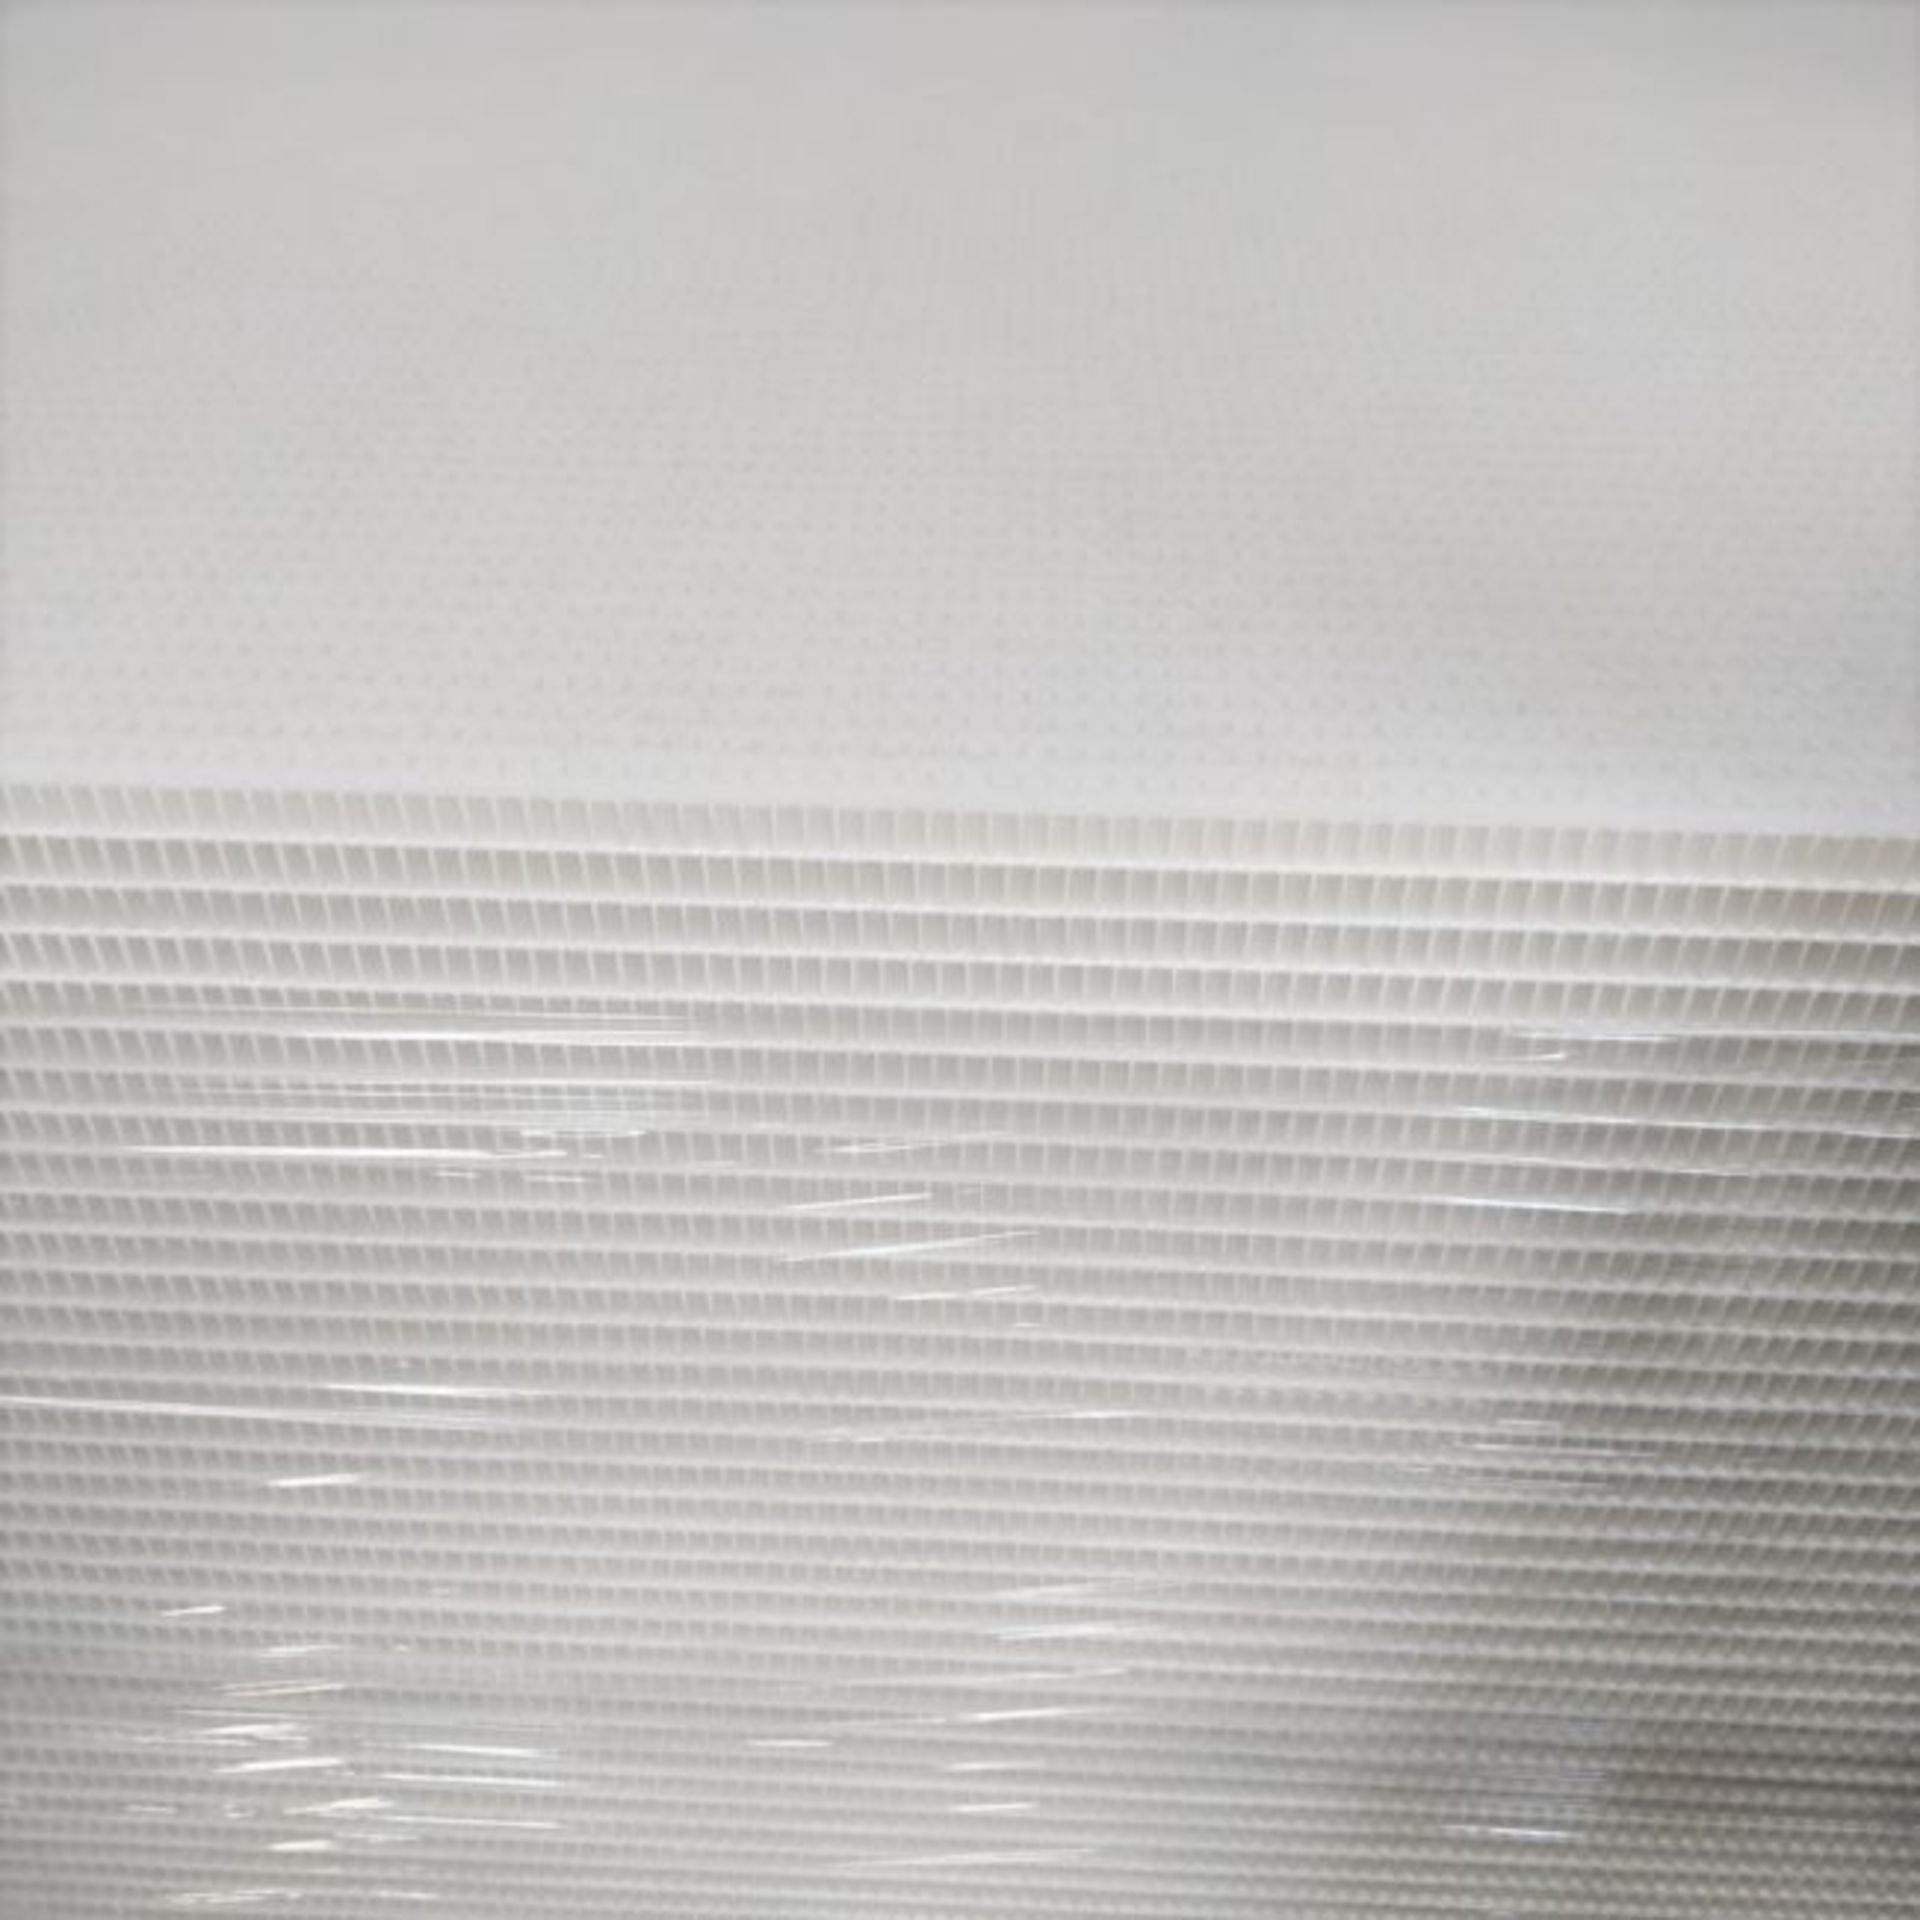 100 x ThermHex Thermoplastic Honeycomb Core Panels - Size: Approx. 2630 x 1210 x 18mm - New - Image 3 of 5